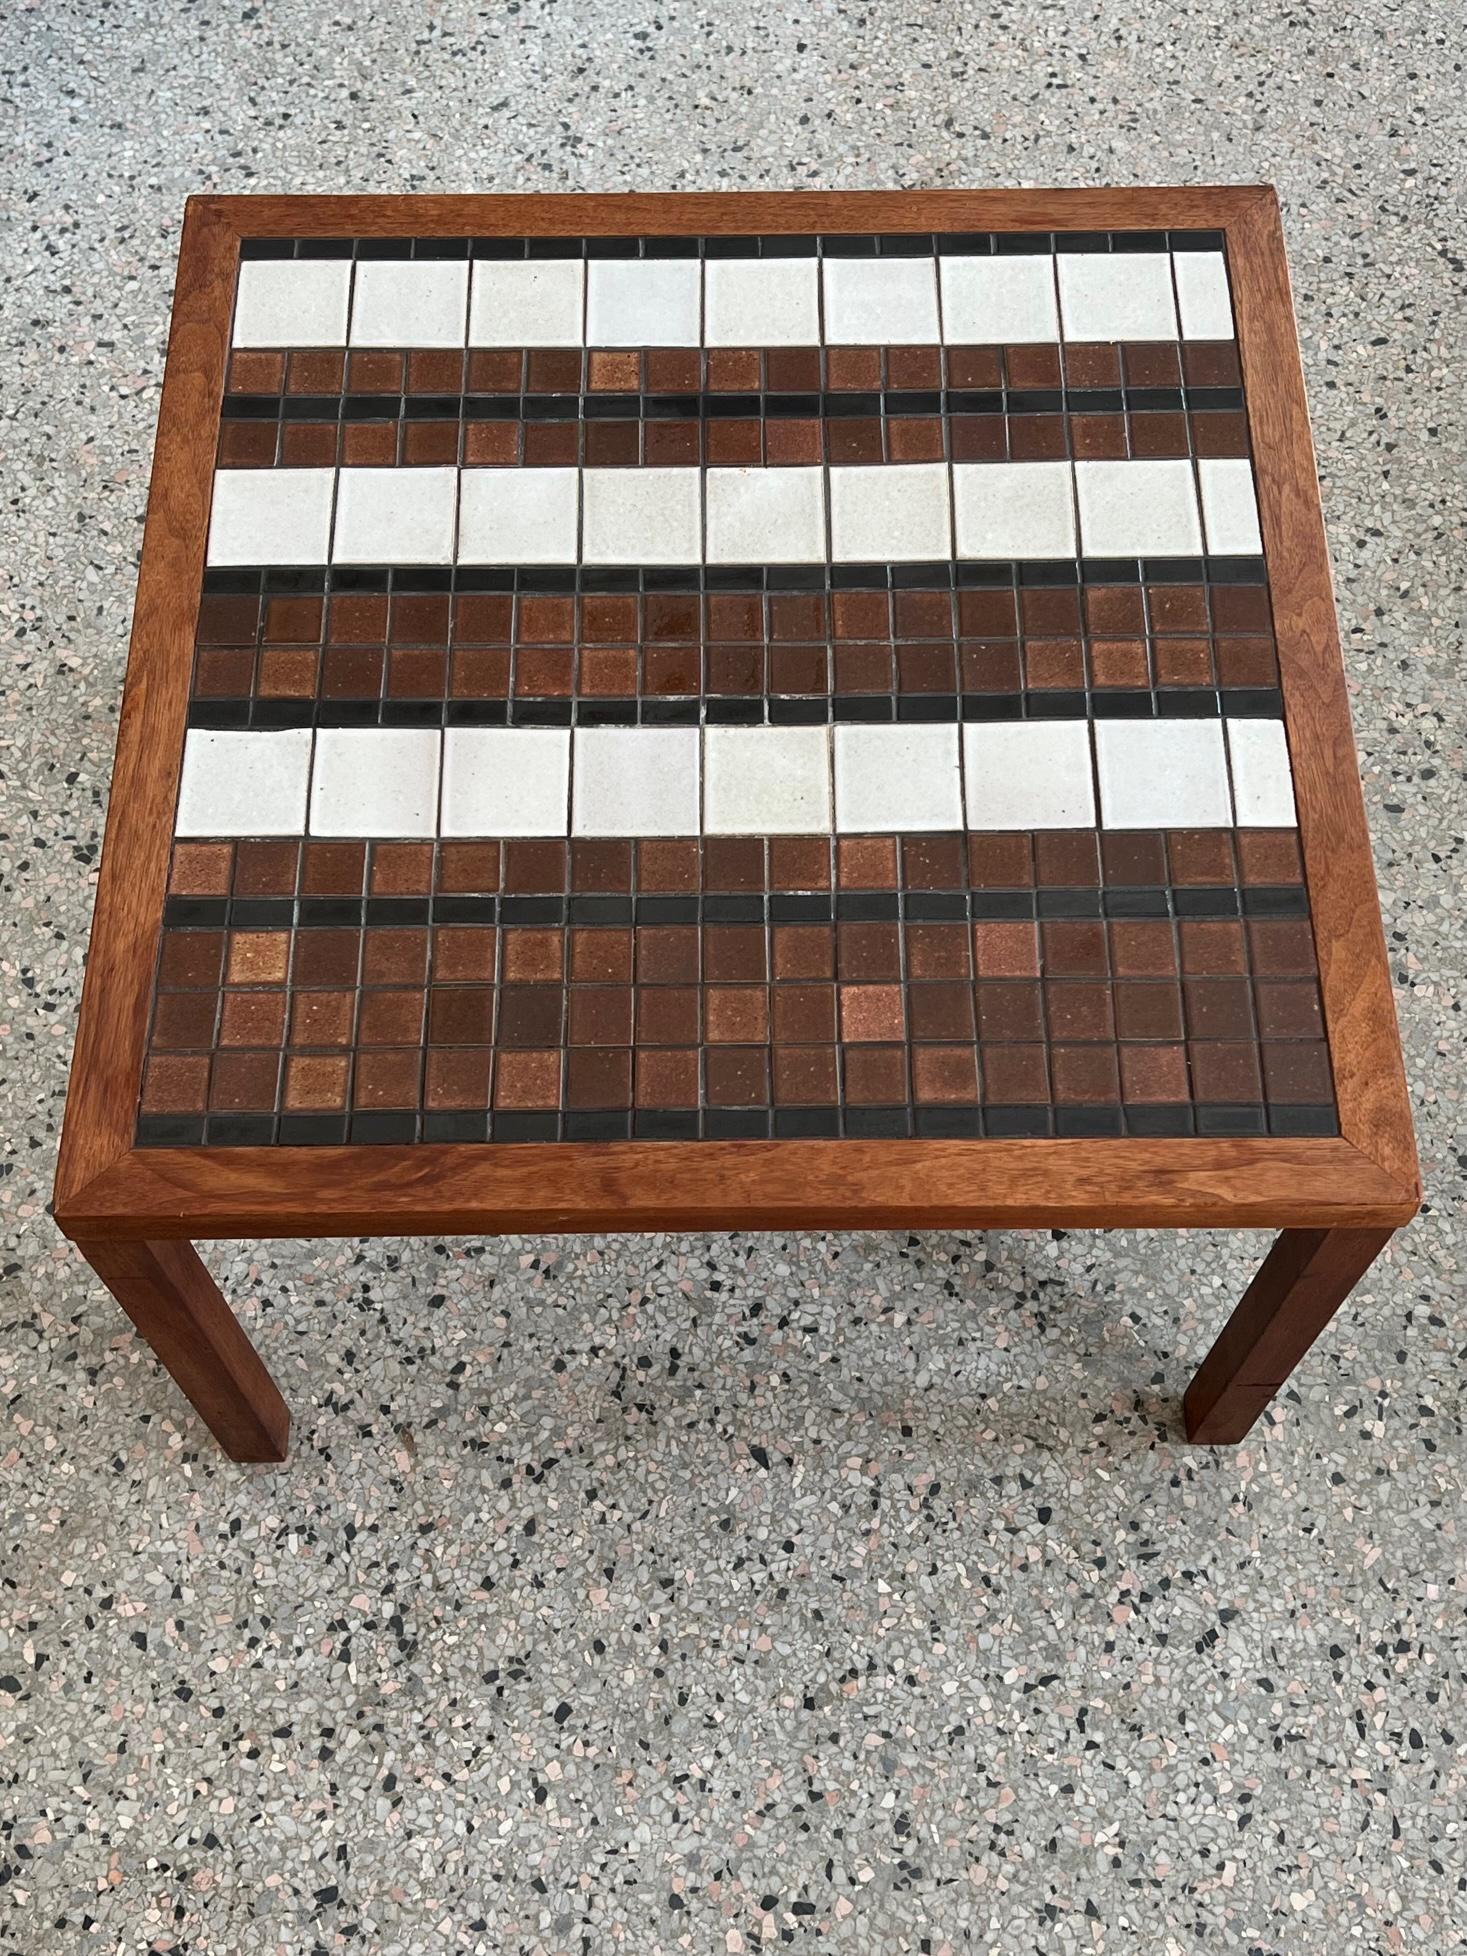 A rare and unusual side table by Gordon Martz/Marshall studios ca' 1960's. Interesting pattern of ceramic tiles encased in walnut square shaped frame. Measures 16